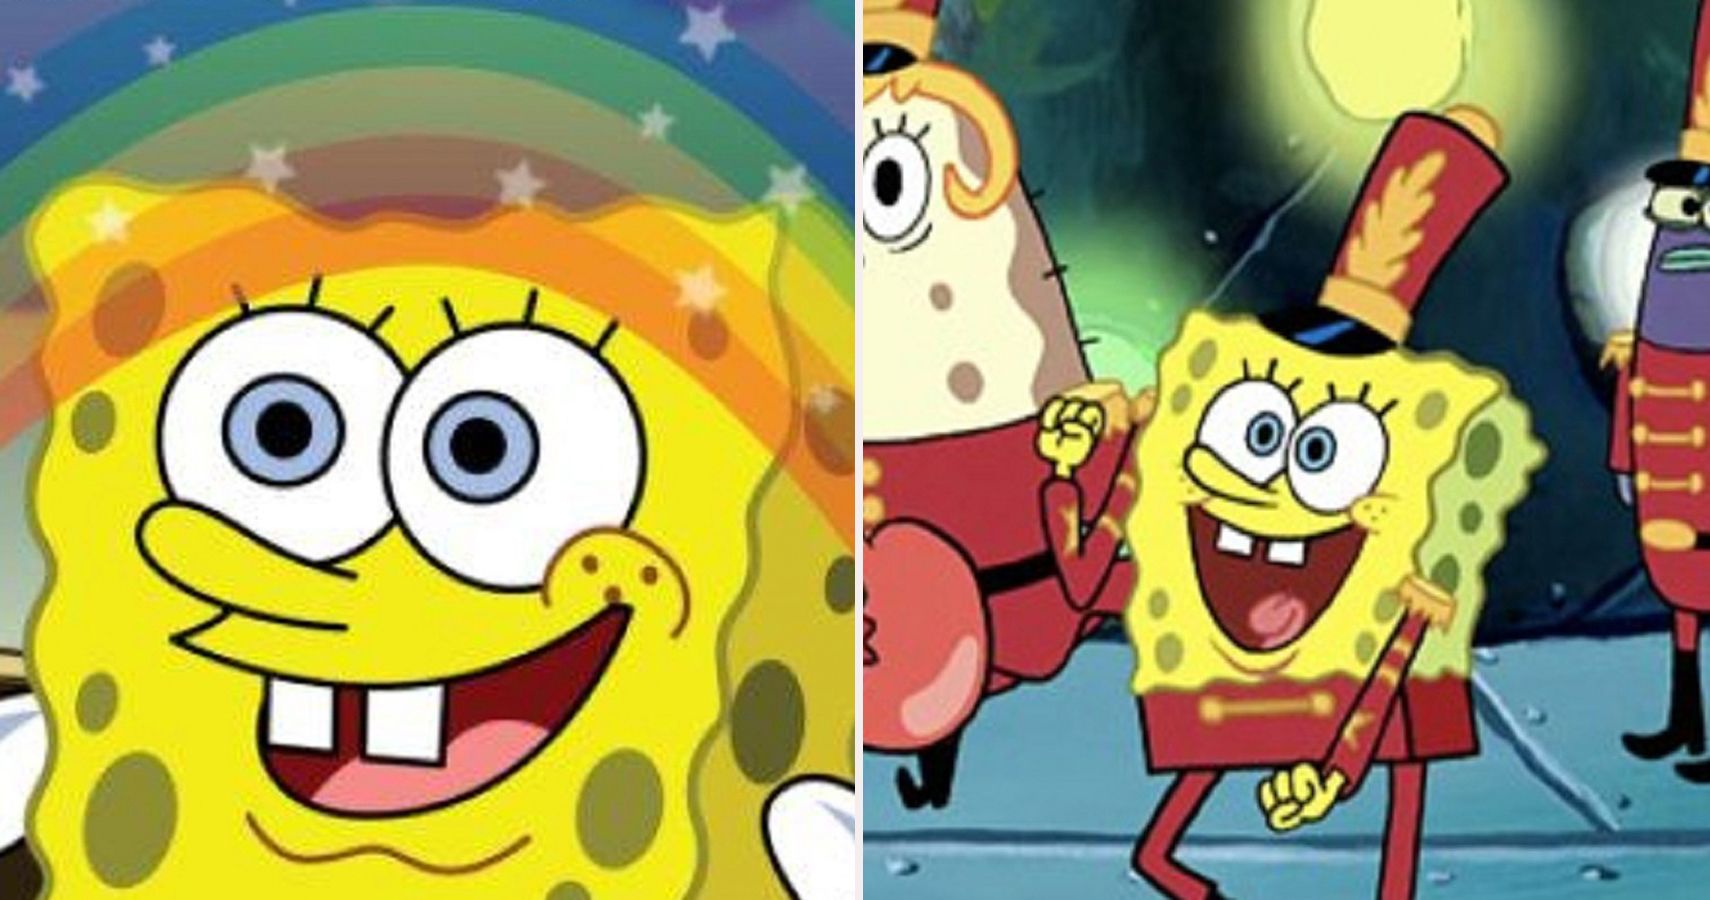 10 Best Pop Culture References Created From Spongebob Squarepants